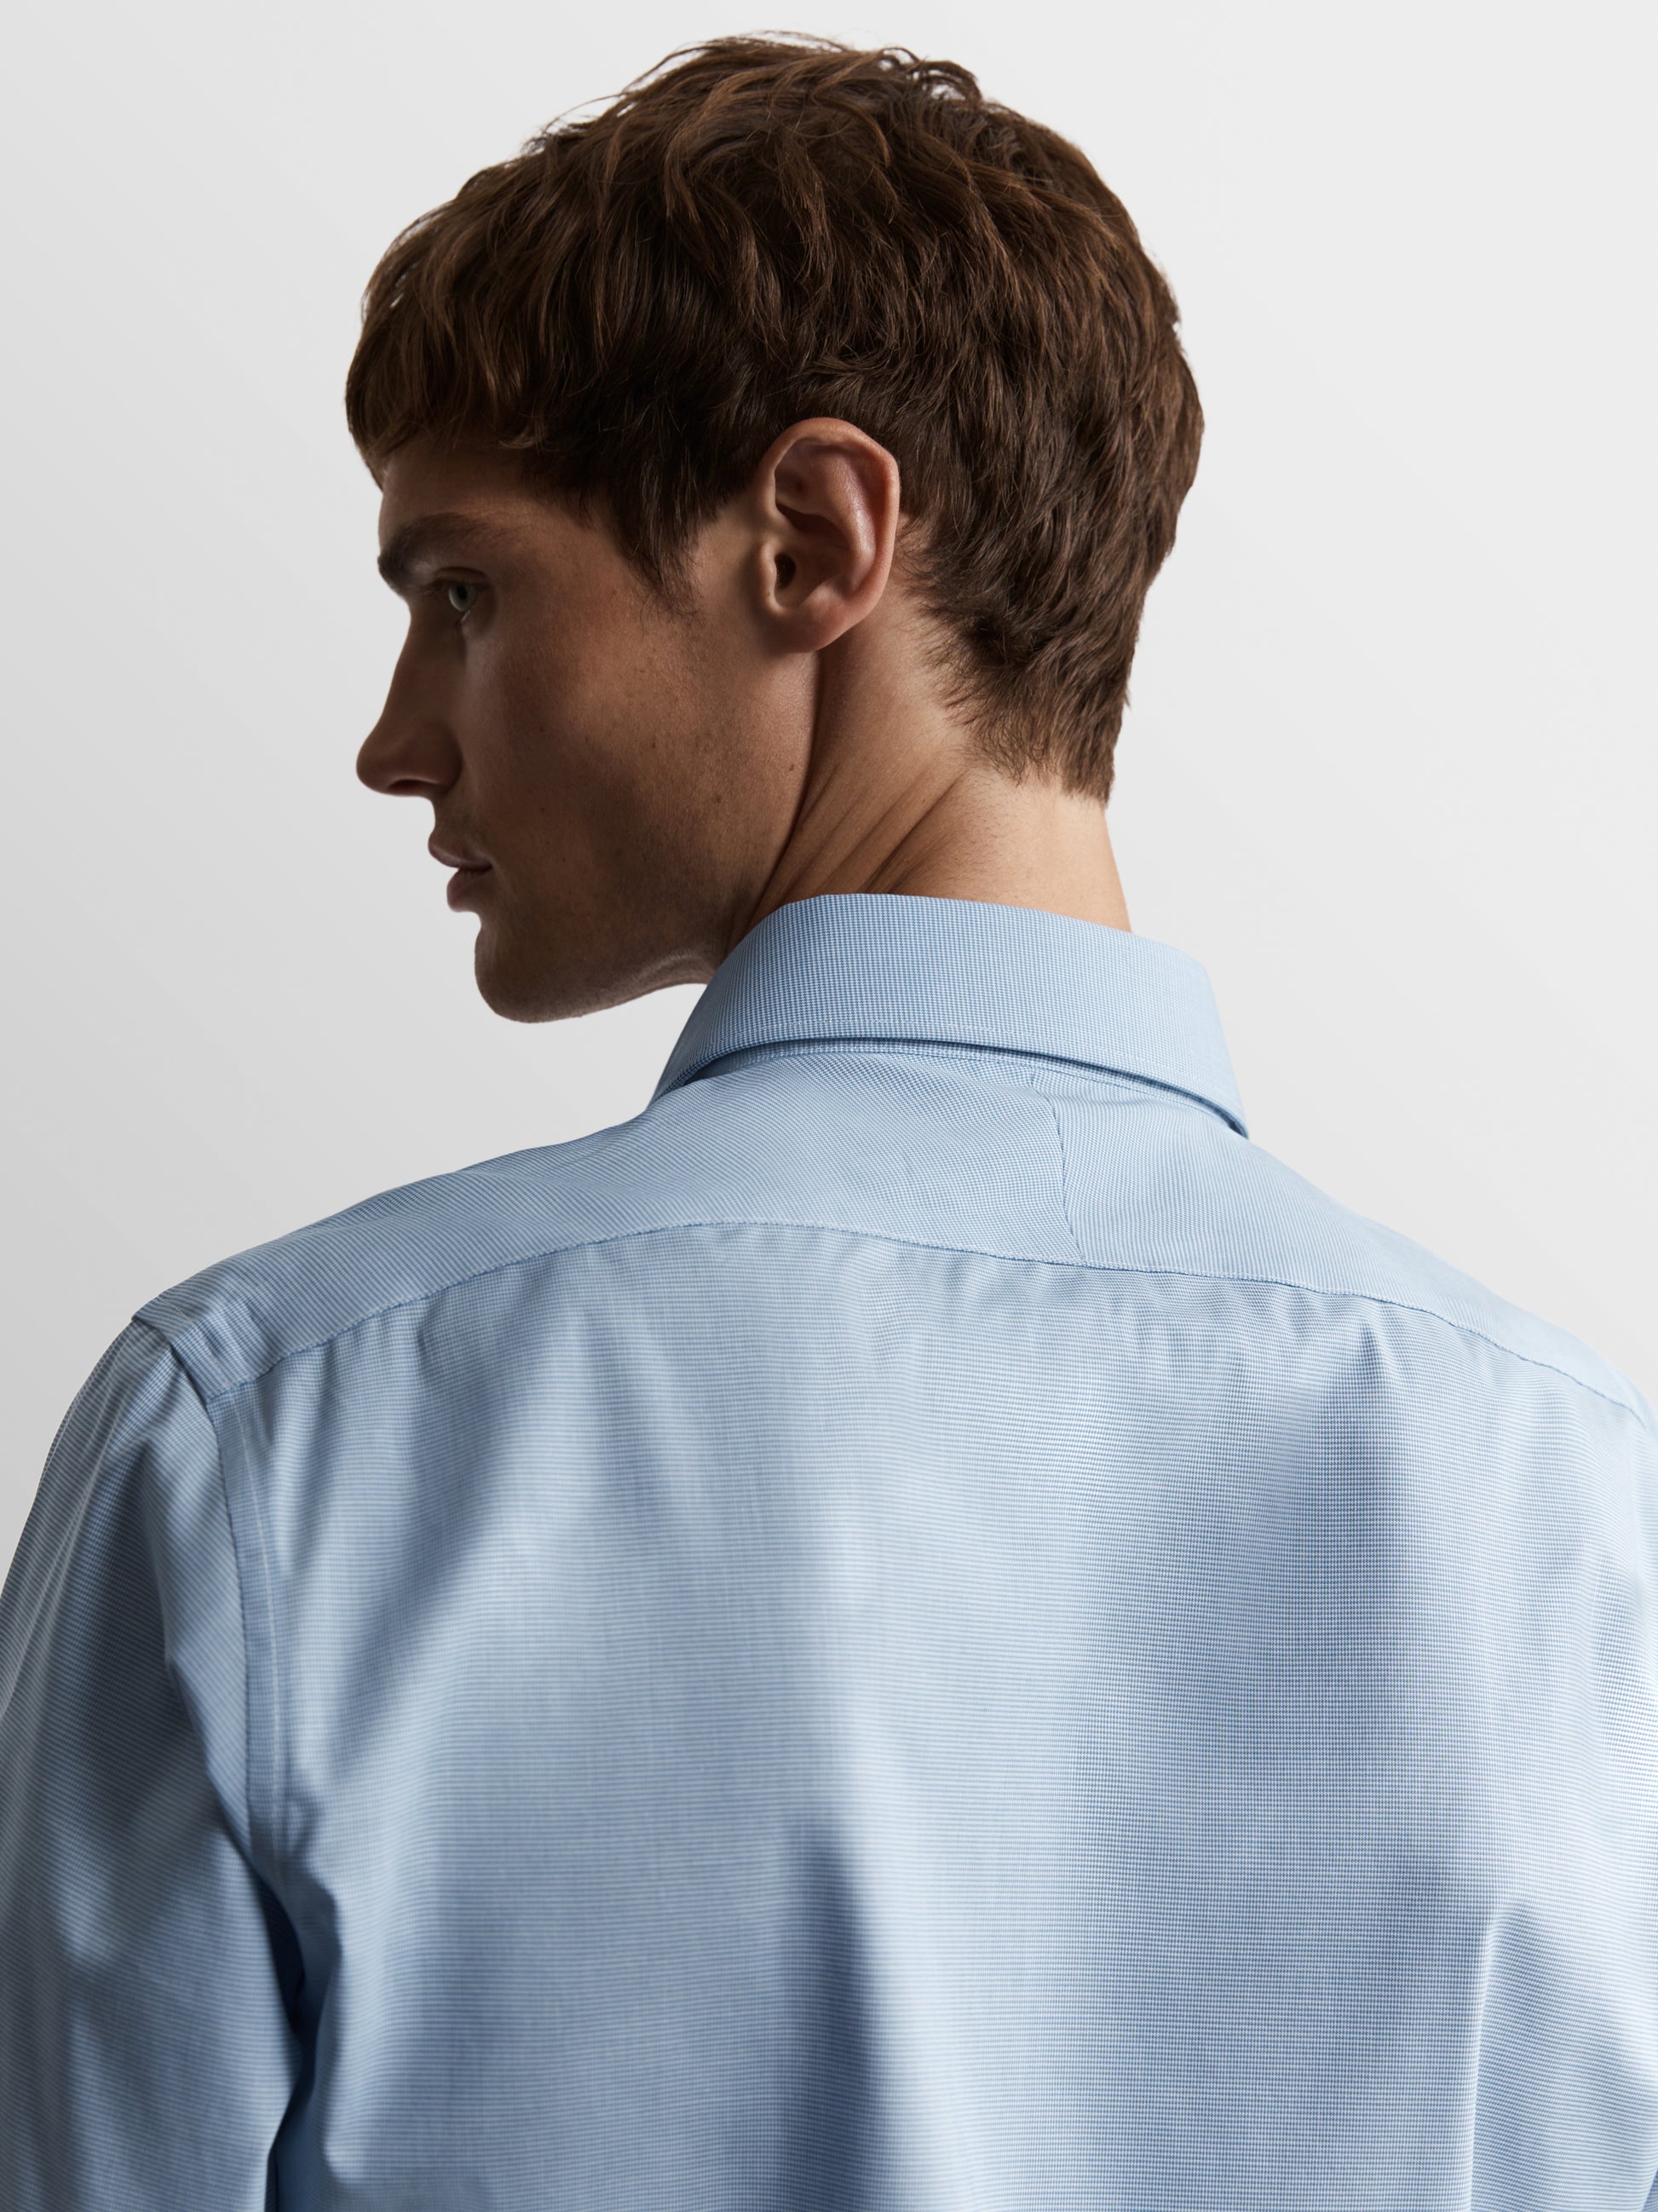 Image 3 of Max Performance Blue Puppytooth Plain Weave Fitted Single Cuff Classic Collar Shirt